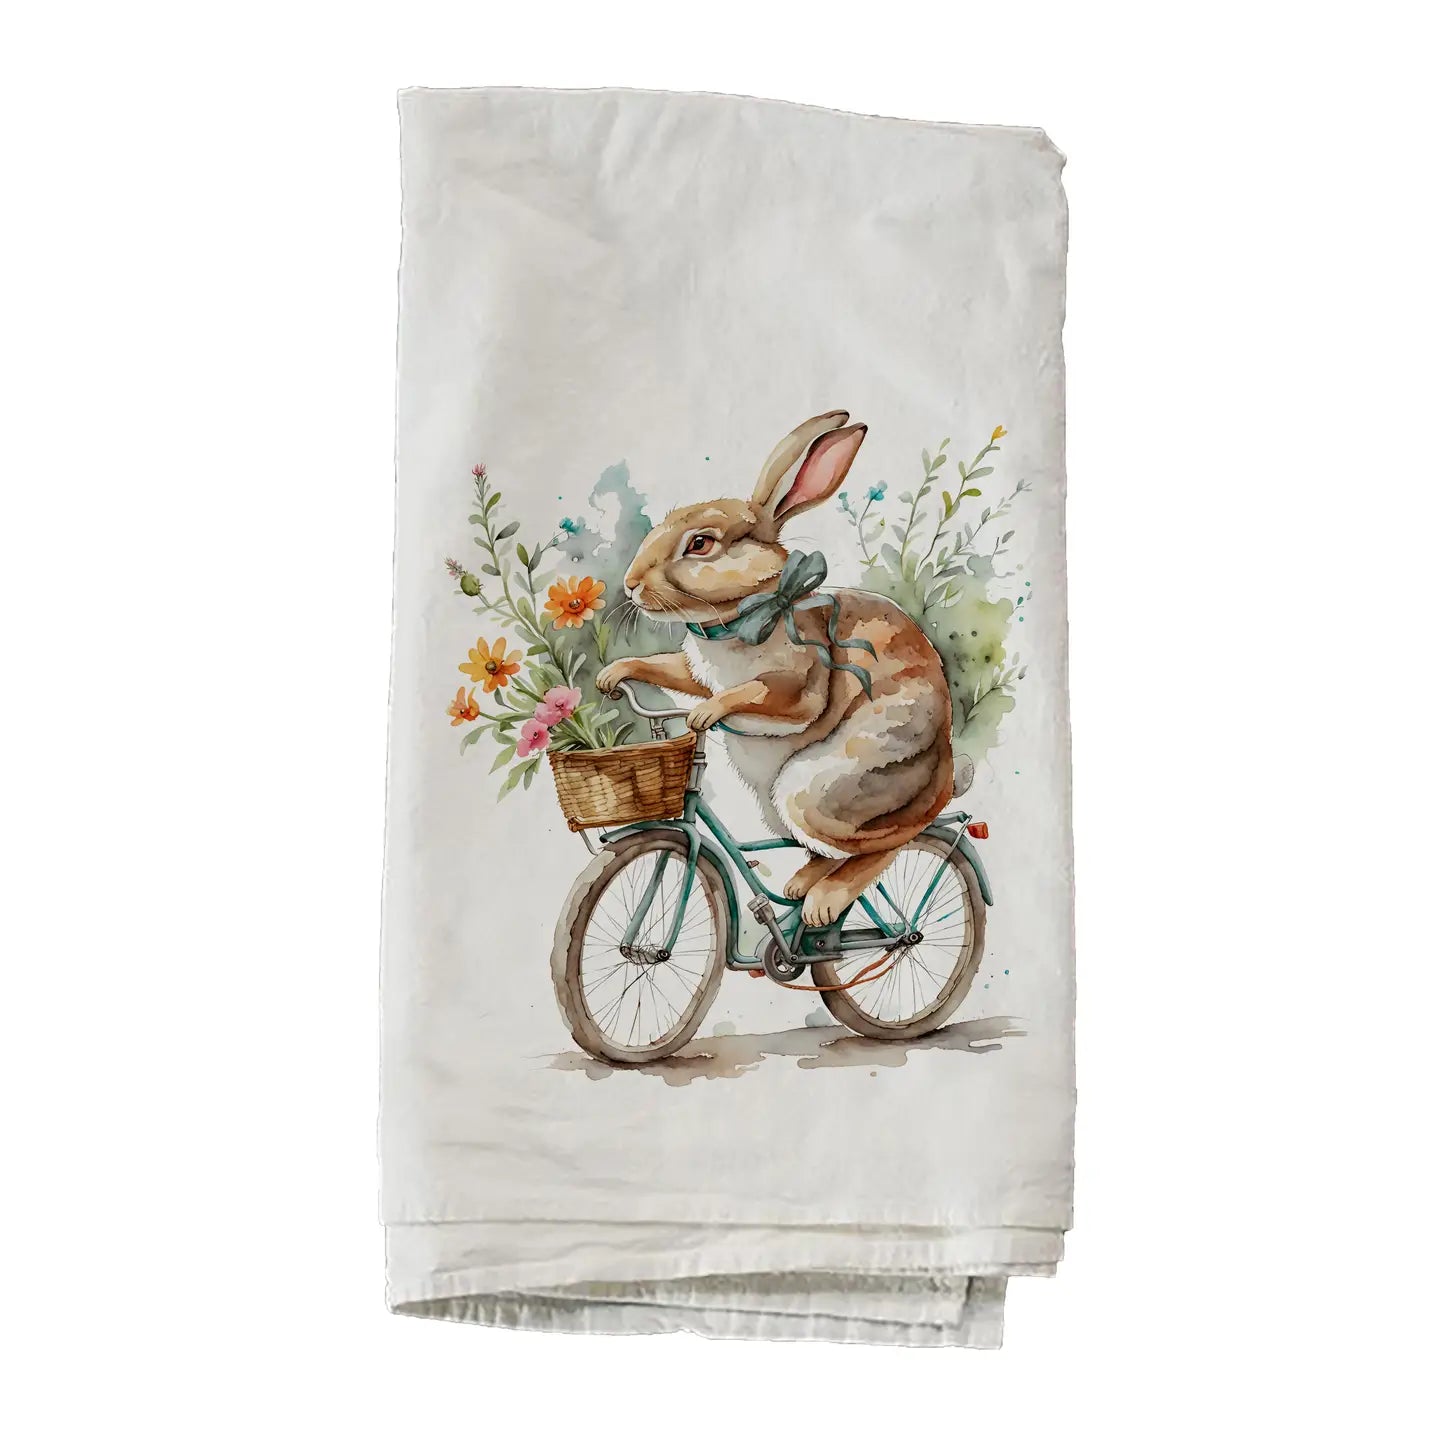 Bunny Flower Delivery Towel